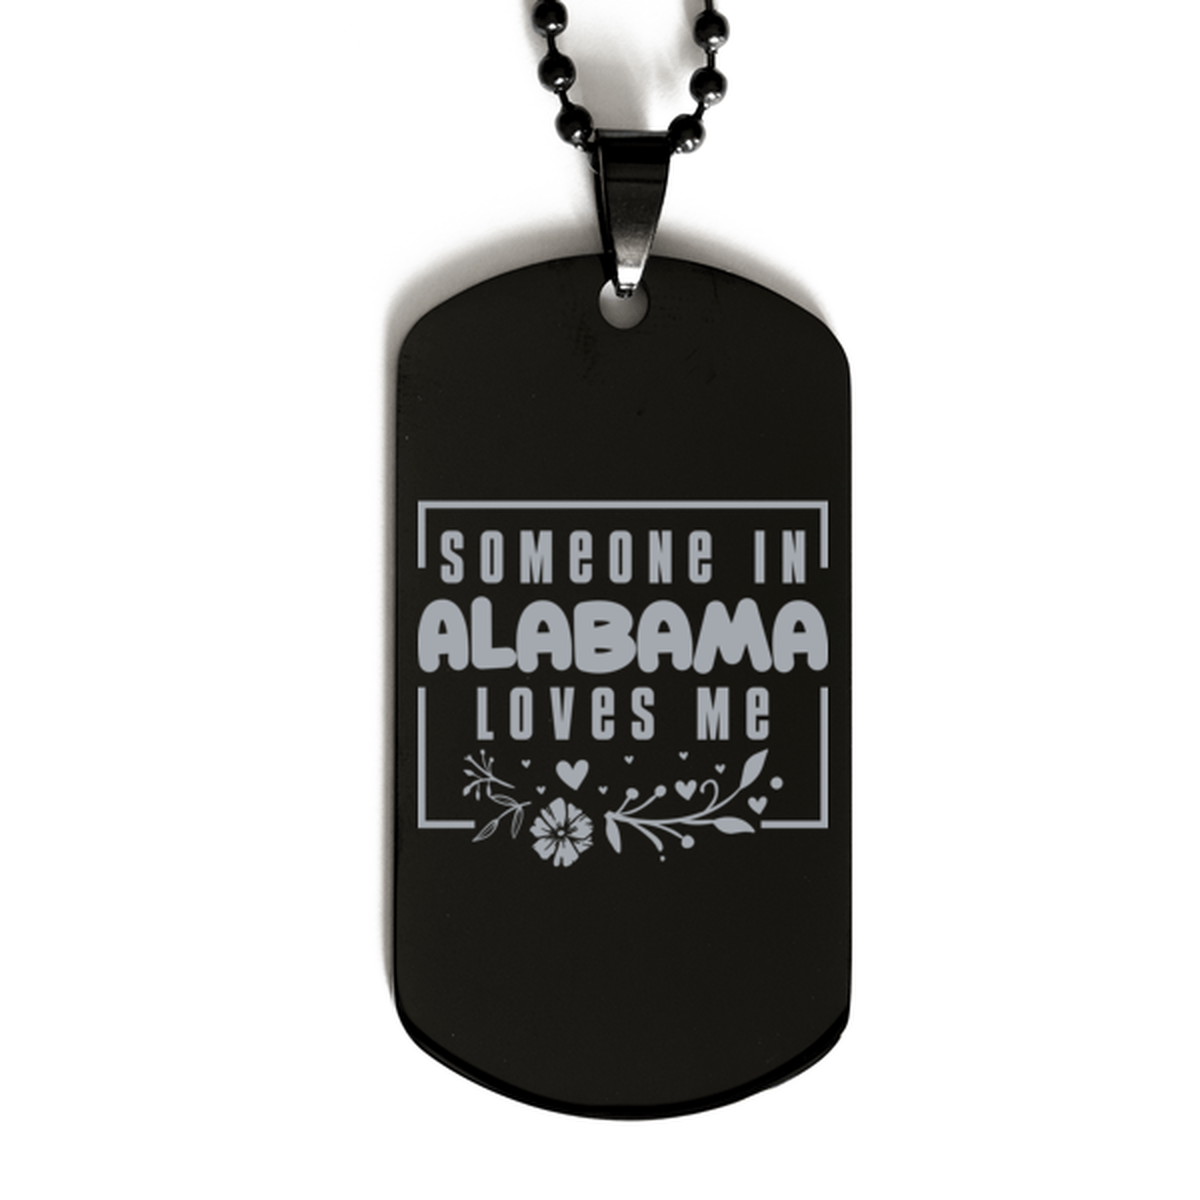 Cute Alabama Black Dog Tag Necklace, Someone in Alabama Loves Me, Best Birthday Gifts from Alabama Friends & Family